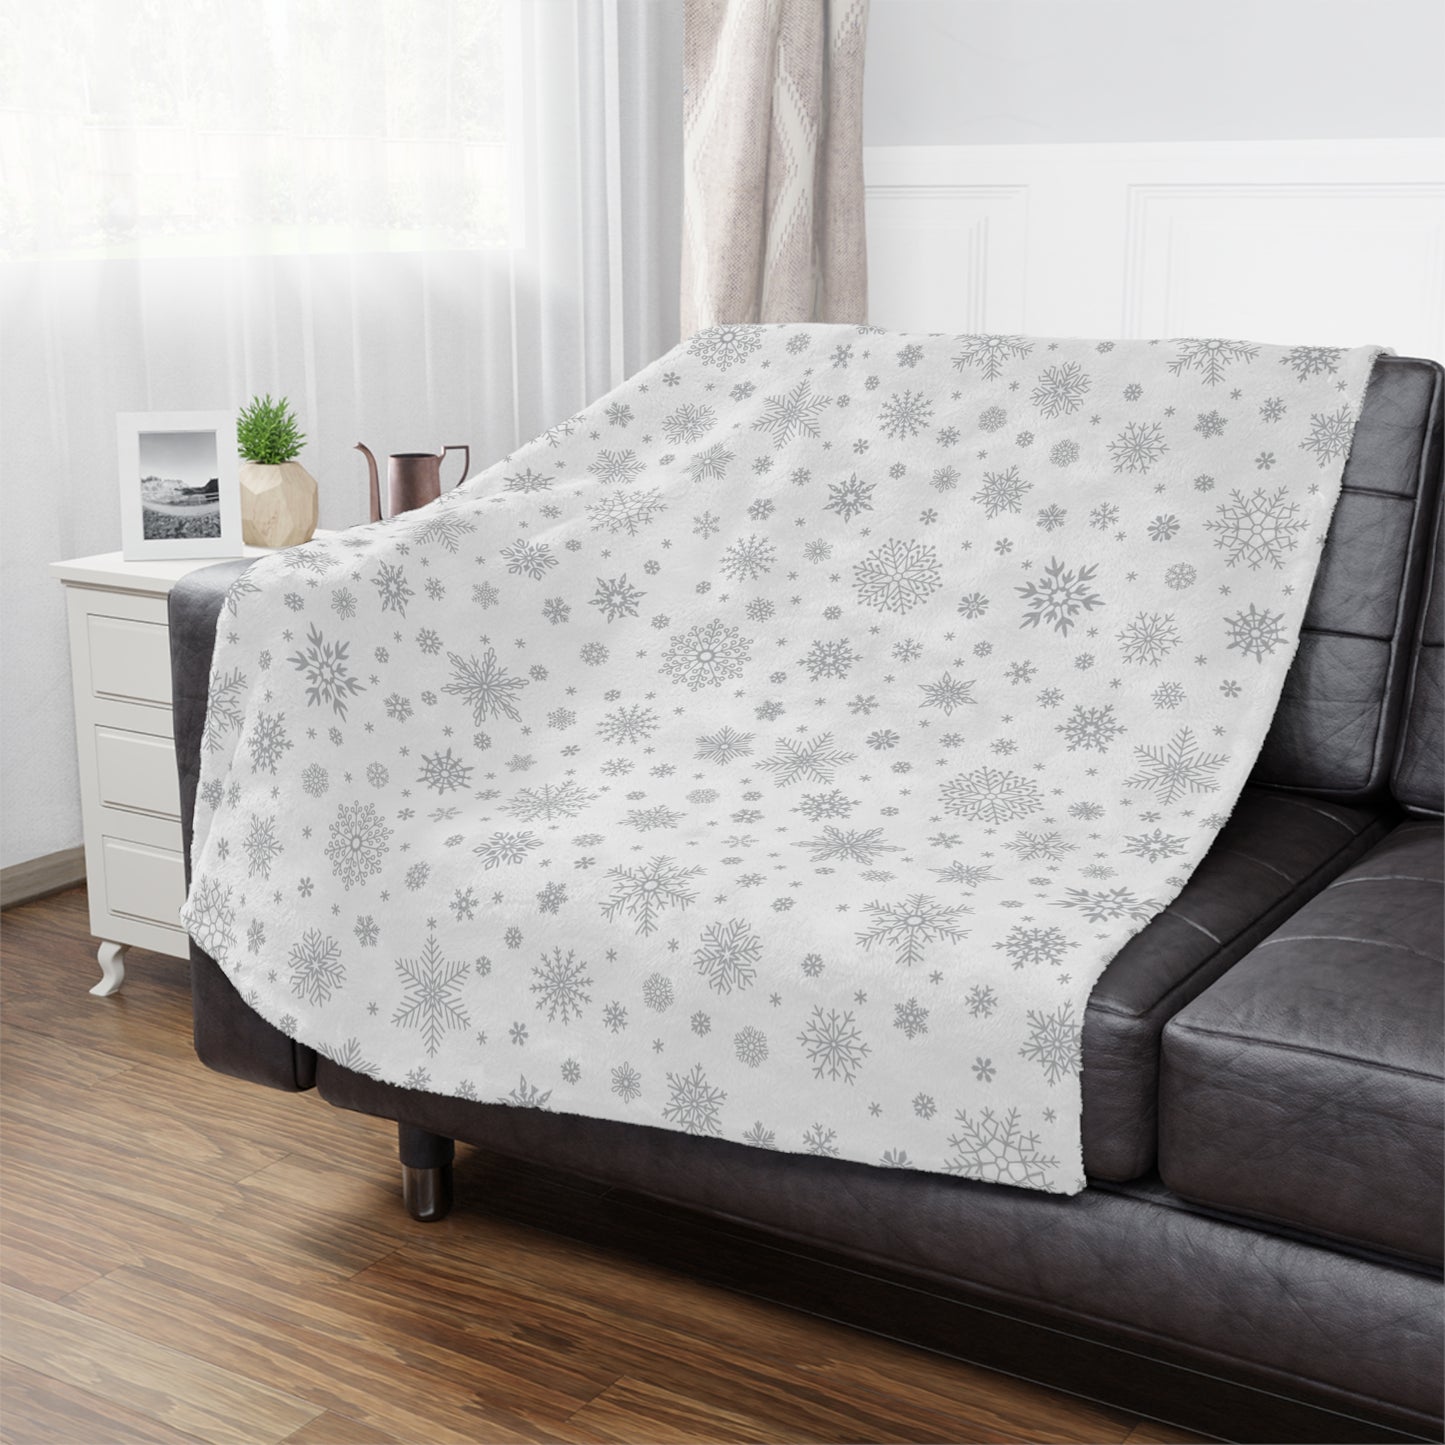 Silver Snowflakes Ultra Soft Minky Blanket